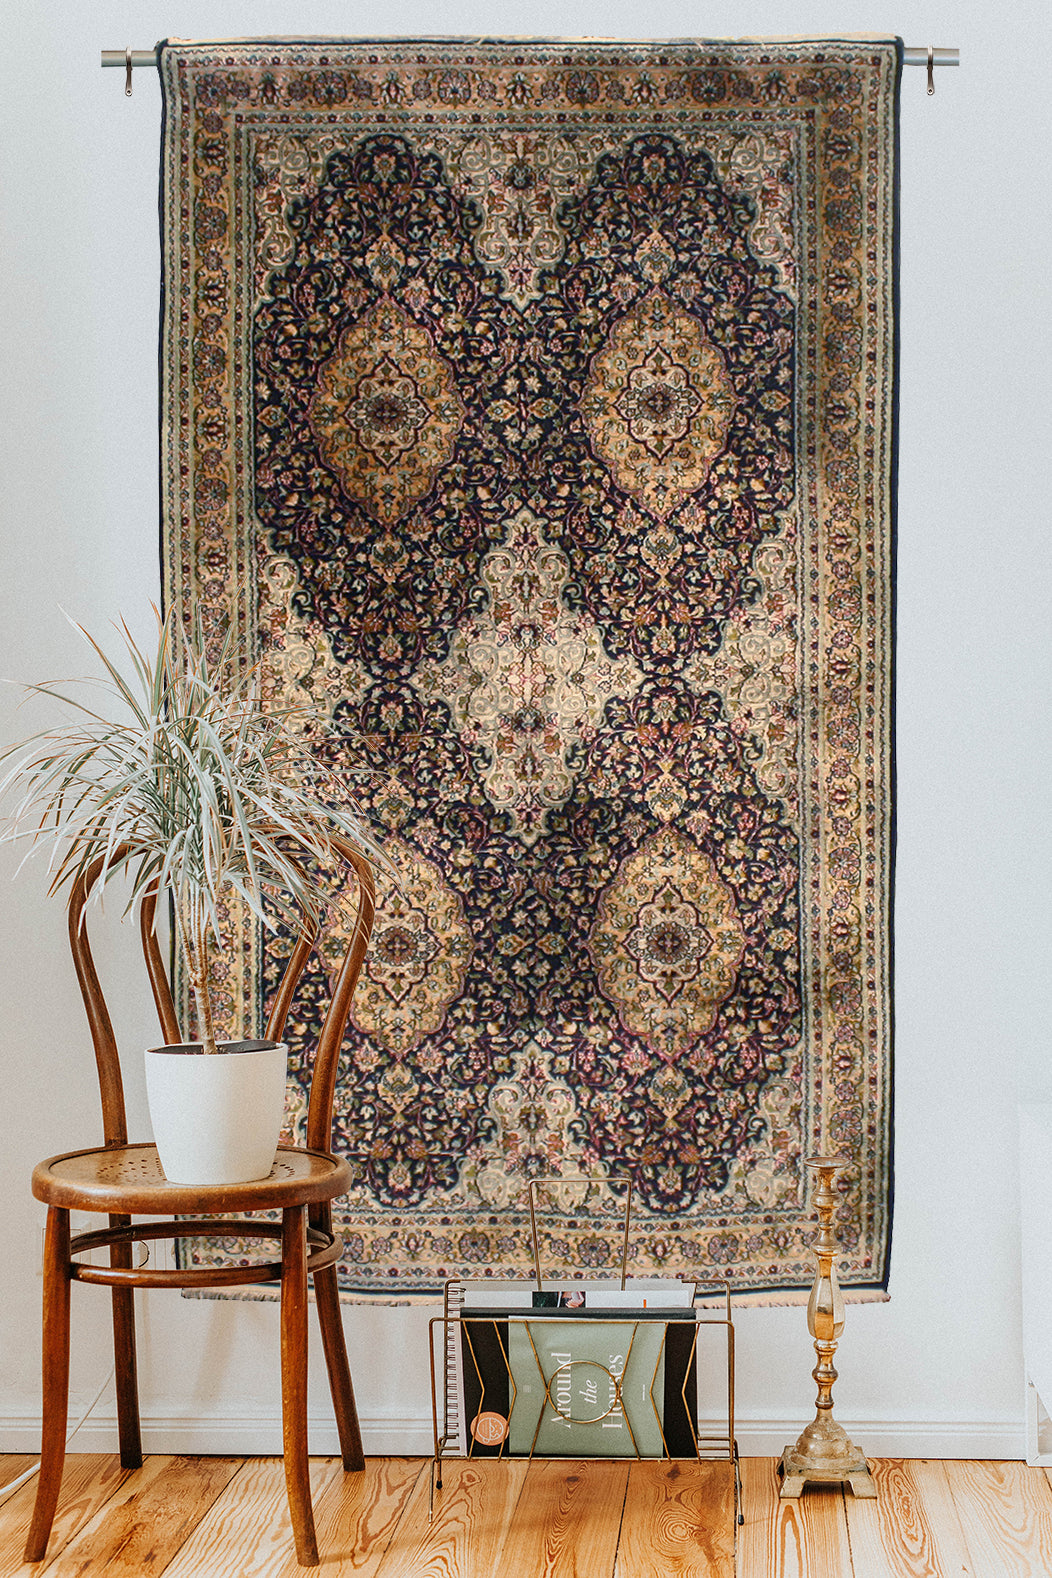 How to hang hooked rugs..